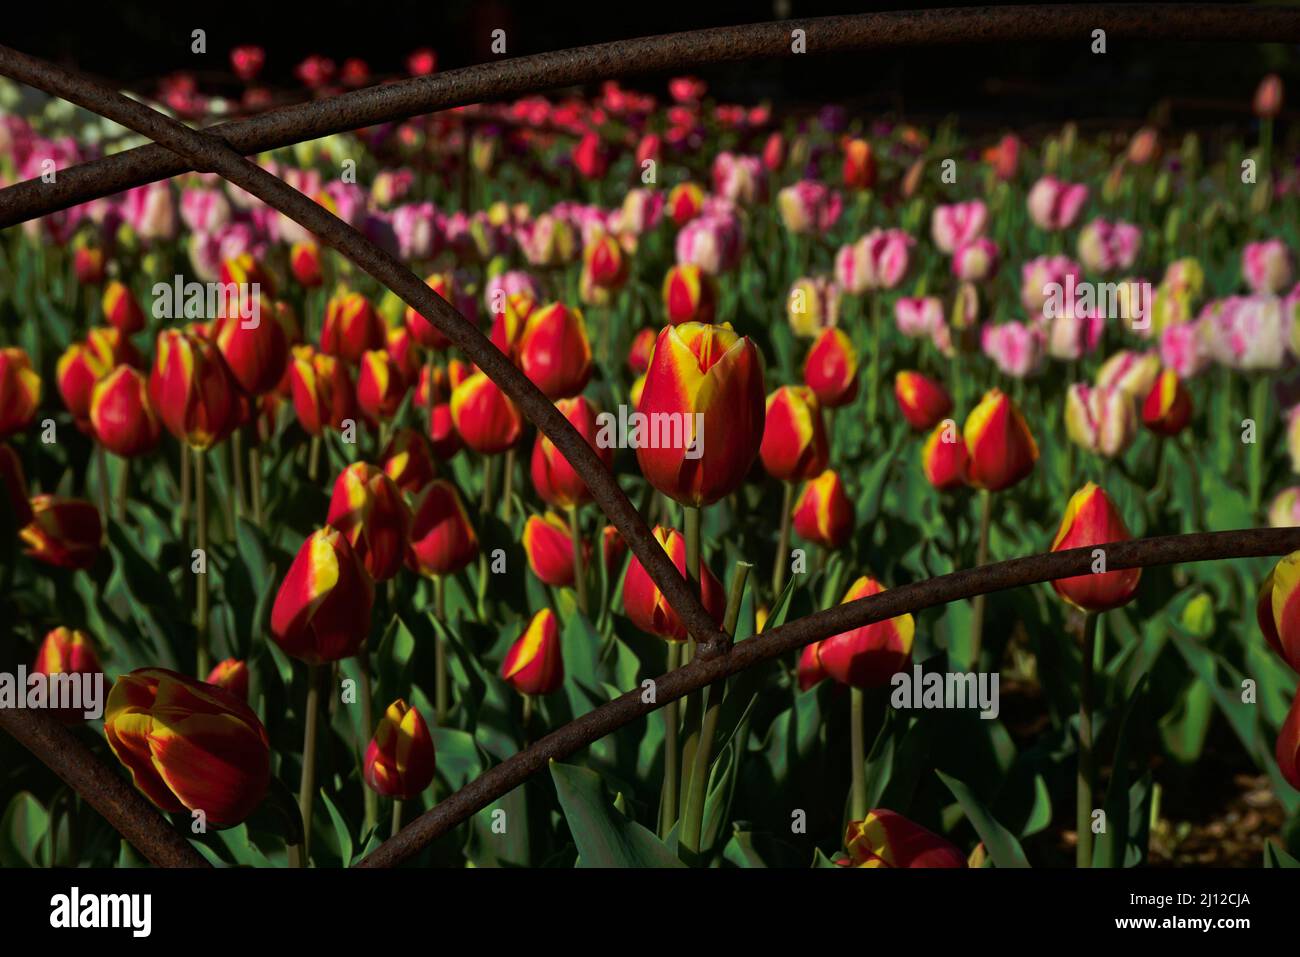 Garden full of  blooming tulip beauty & inspiration. Rich in color. textured patterns, growth & bursting with life Stock Photo